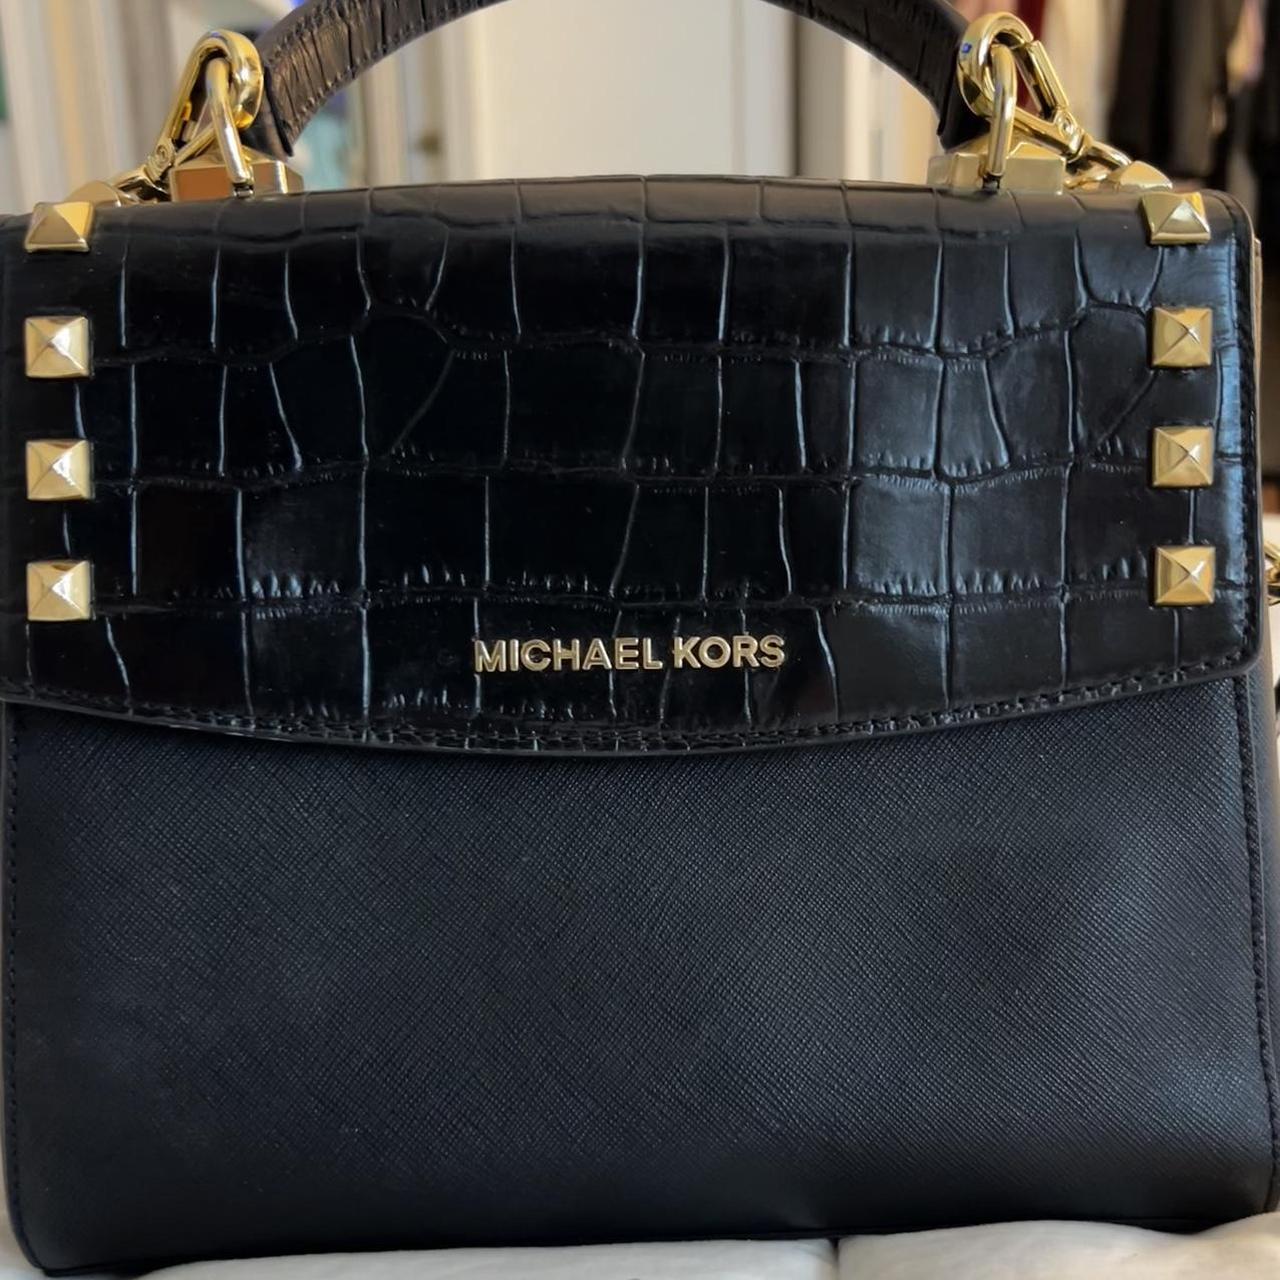 Michael Kors Purses for sale in Scullville, New Jersey | Facebook  Marketplace | Facebook